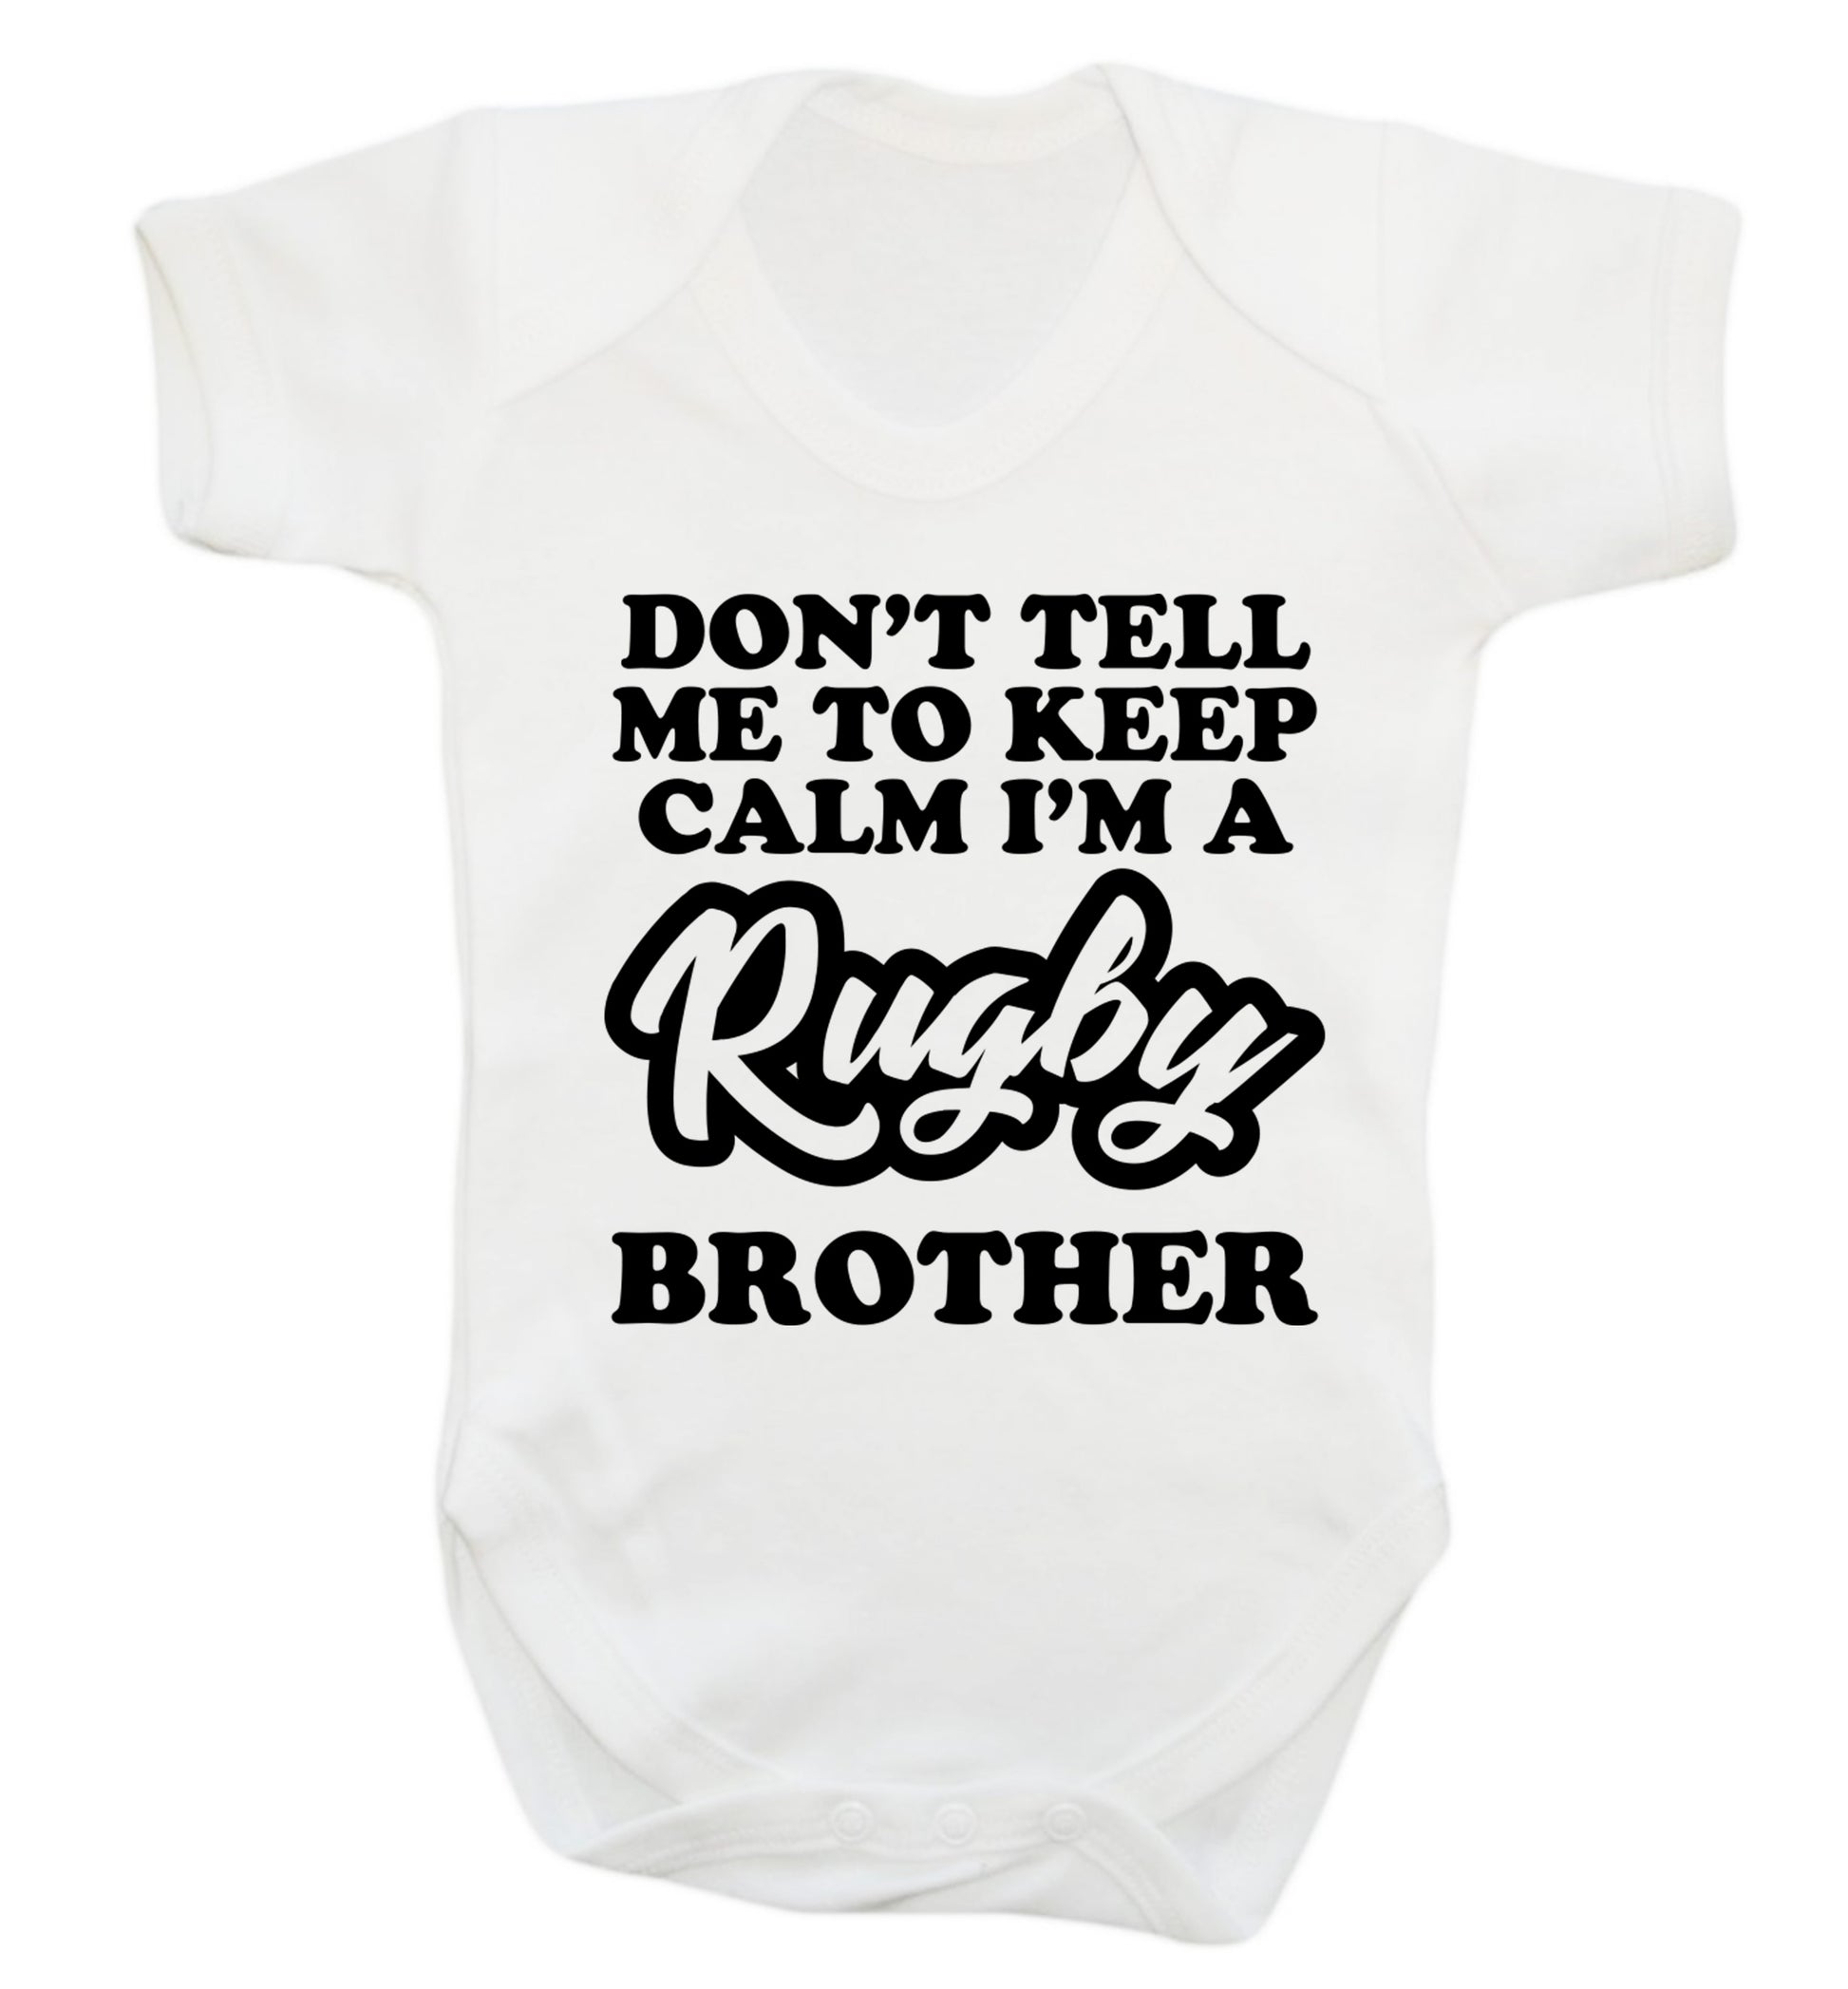 Don't tell me keep calm I'm a rugby brother Baby Vest white 18-24 months